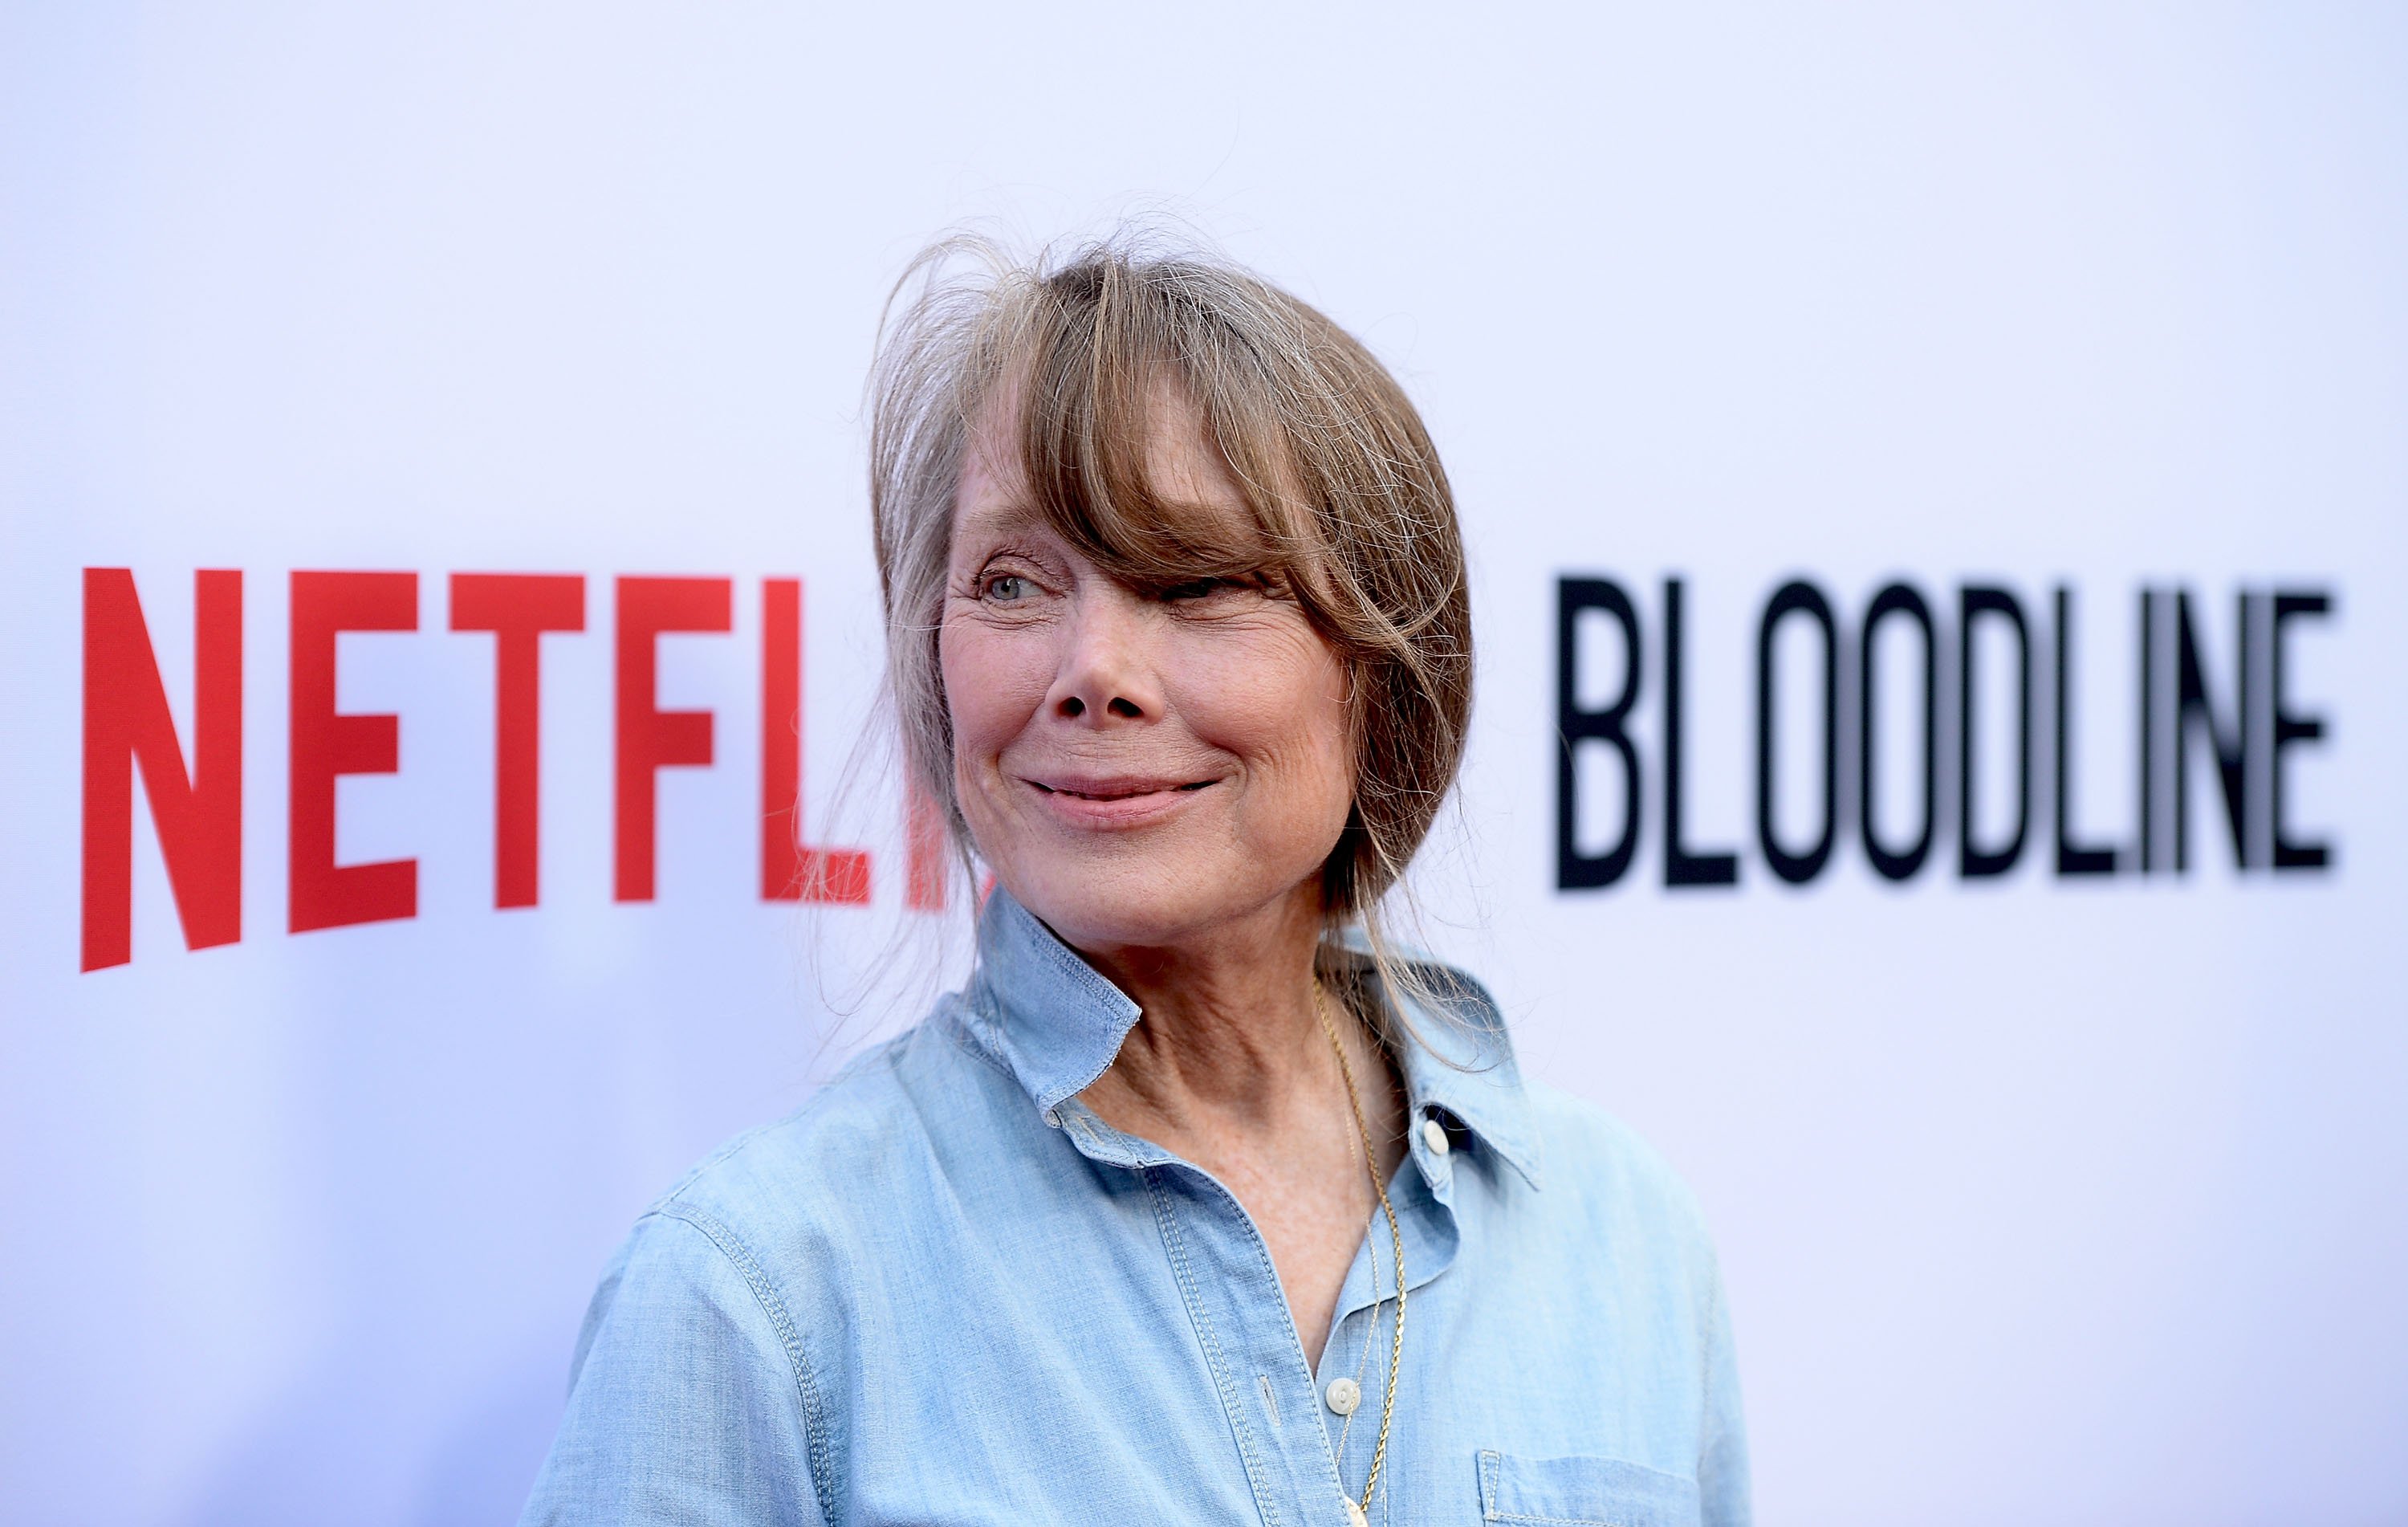 Sissy Spacek at the premiere of Netflix's "Bloodline" Season 3 on May 24, 2017 | Source: Getty Images